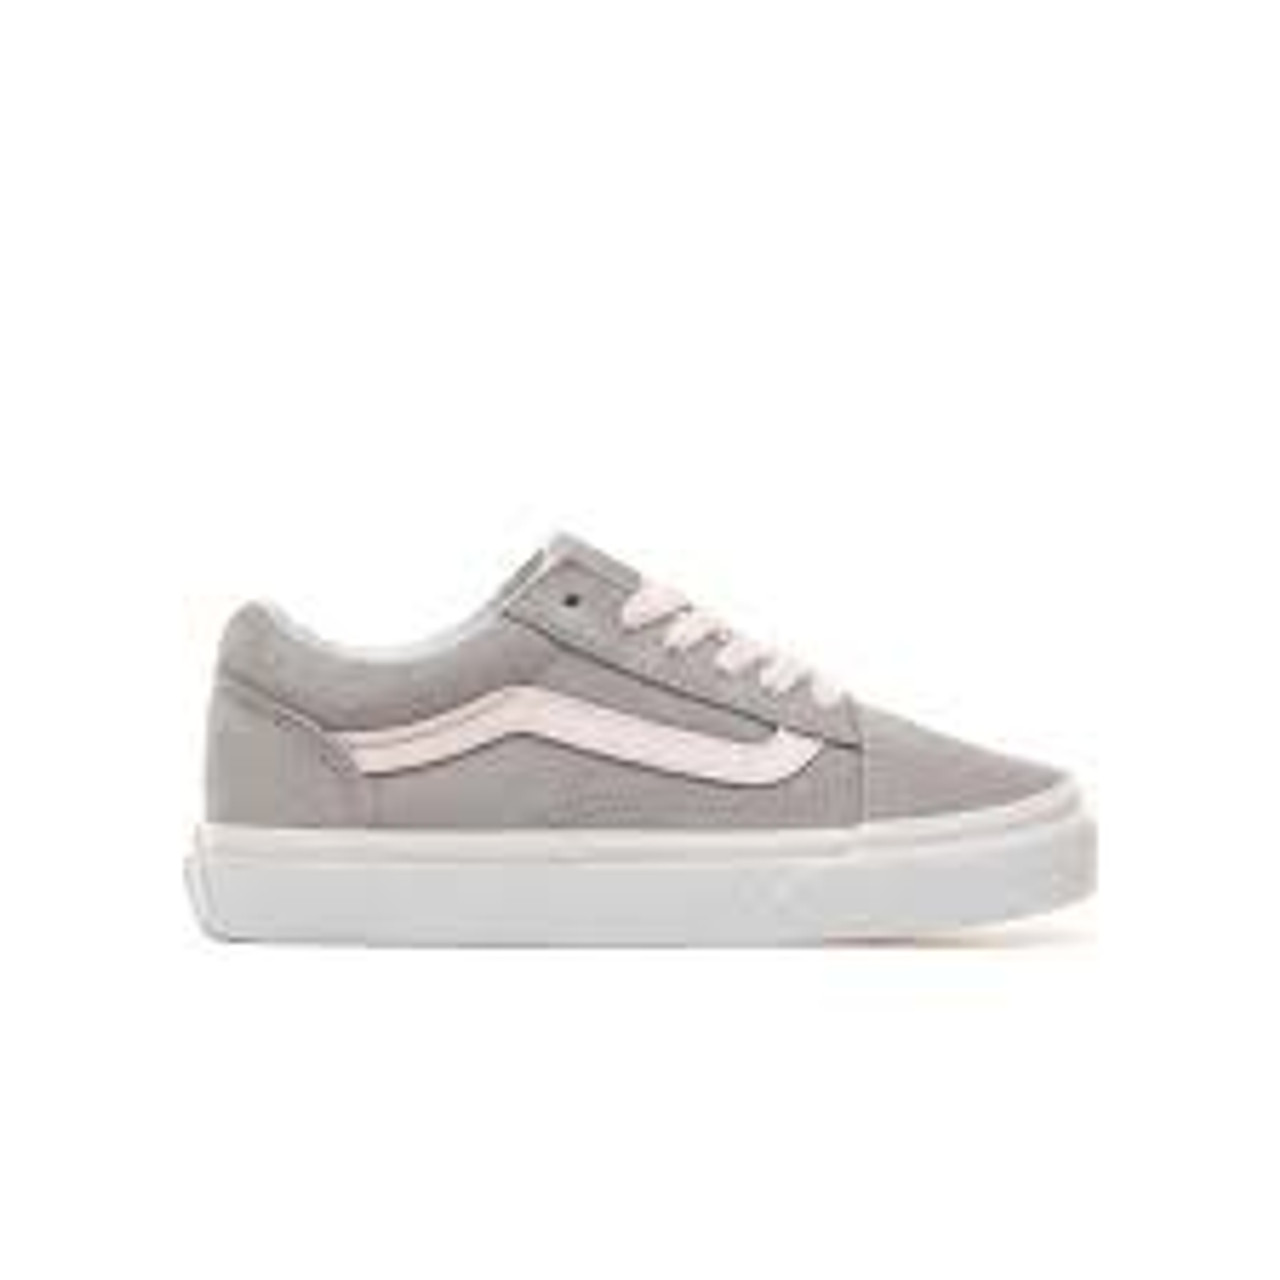 Shoes and Skool - Vans - Pink/White Dirt Youth Old Surf - Suede/Alloy/Heavenly